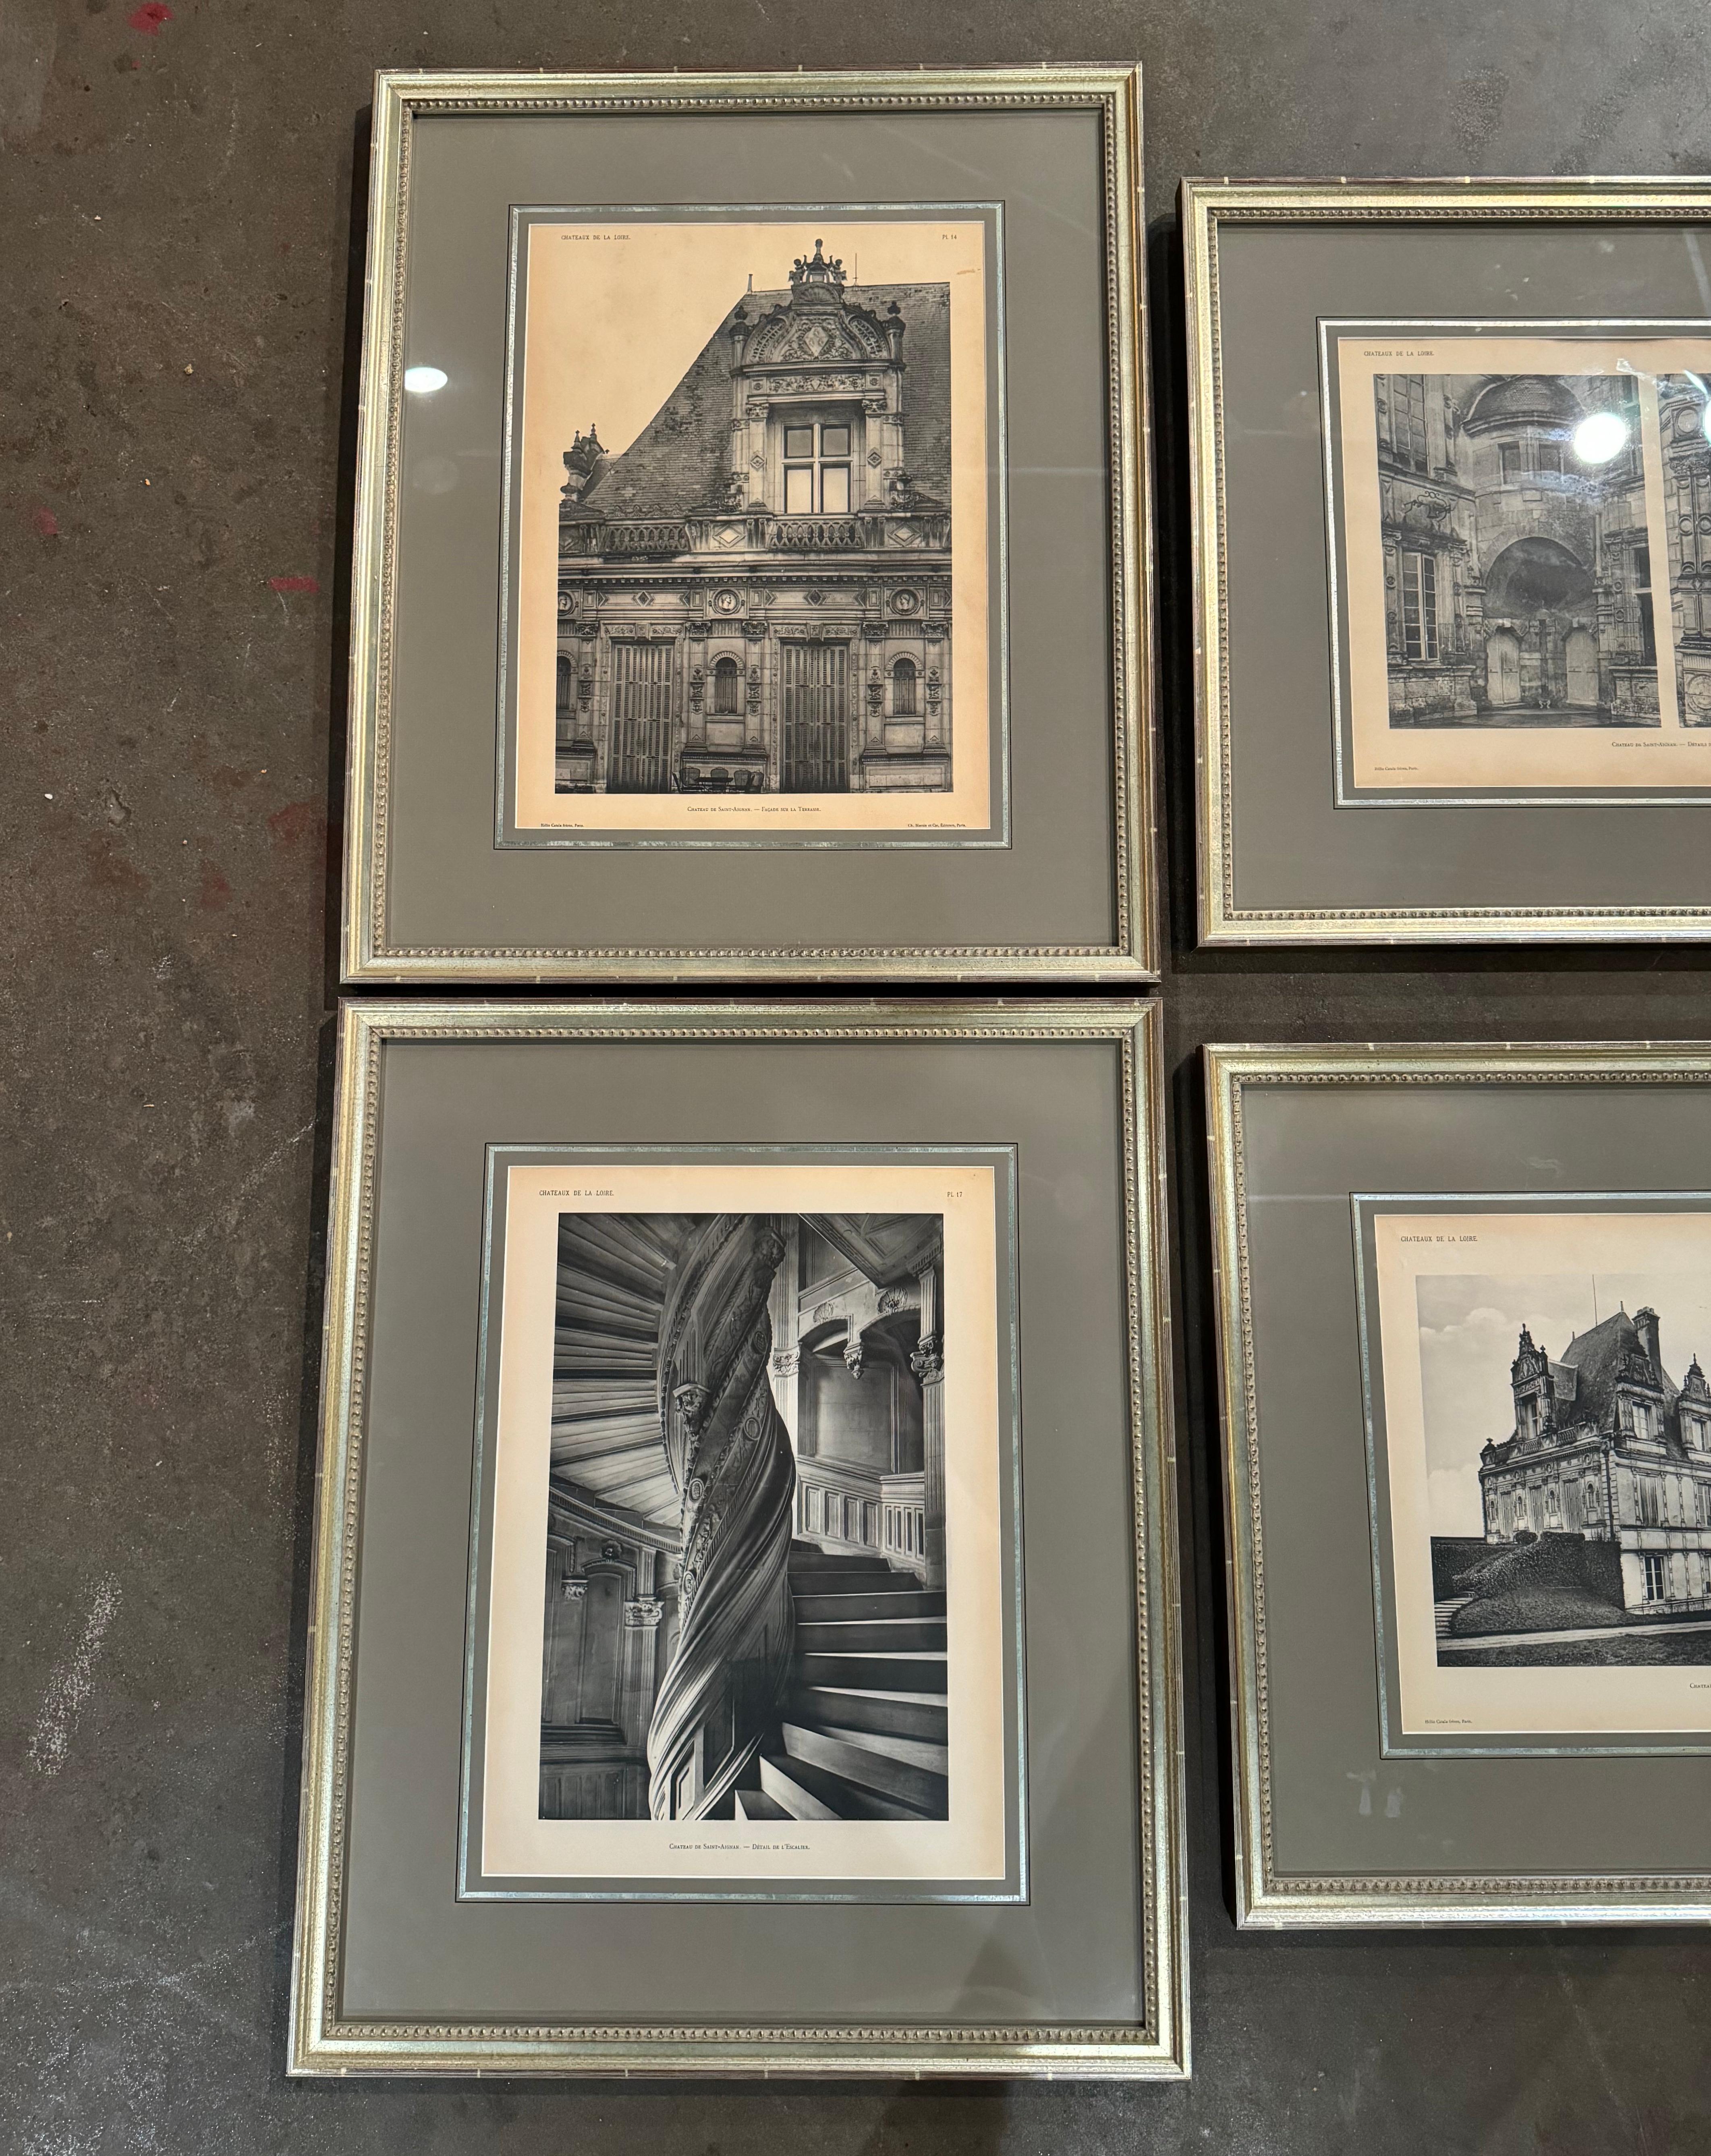 Hand-Crafted 19th Century French Prints in Frames, 